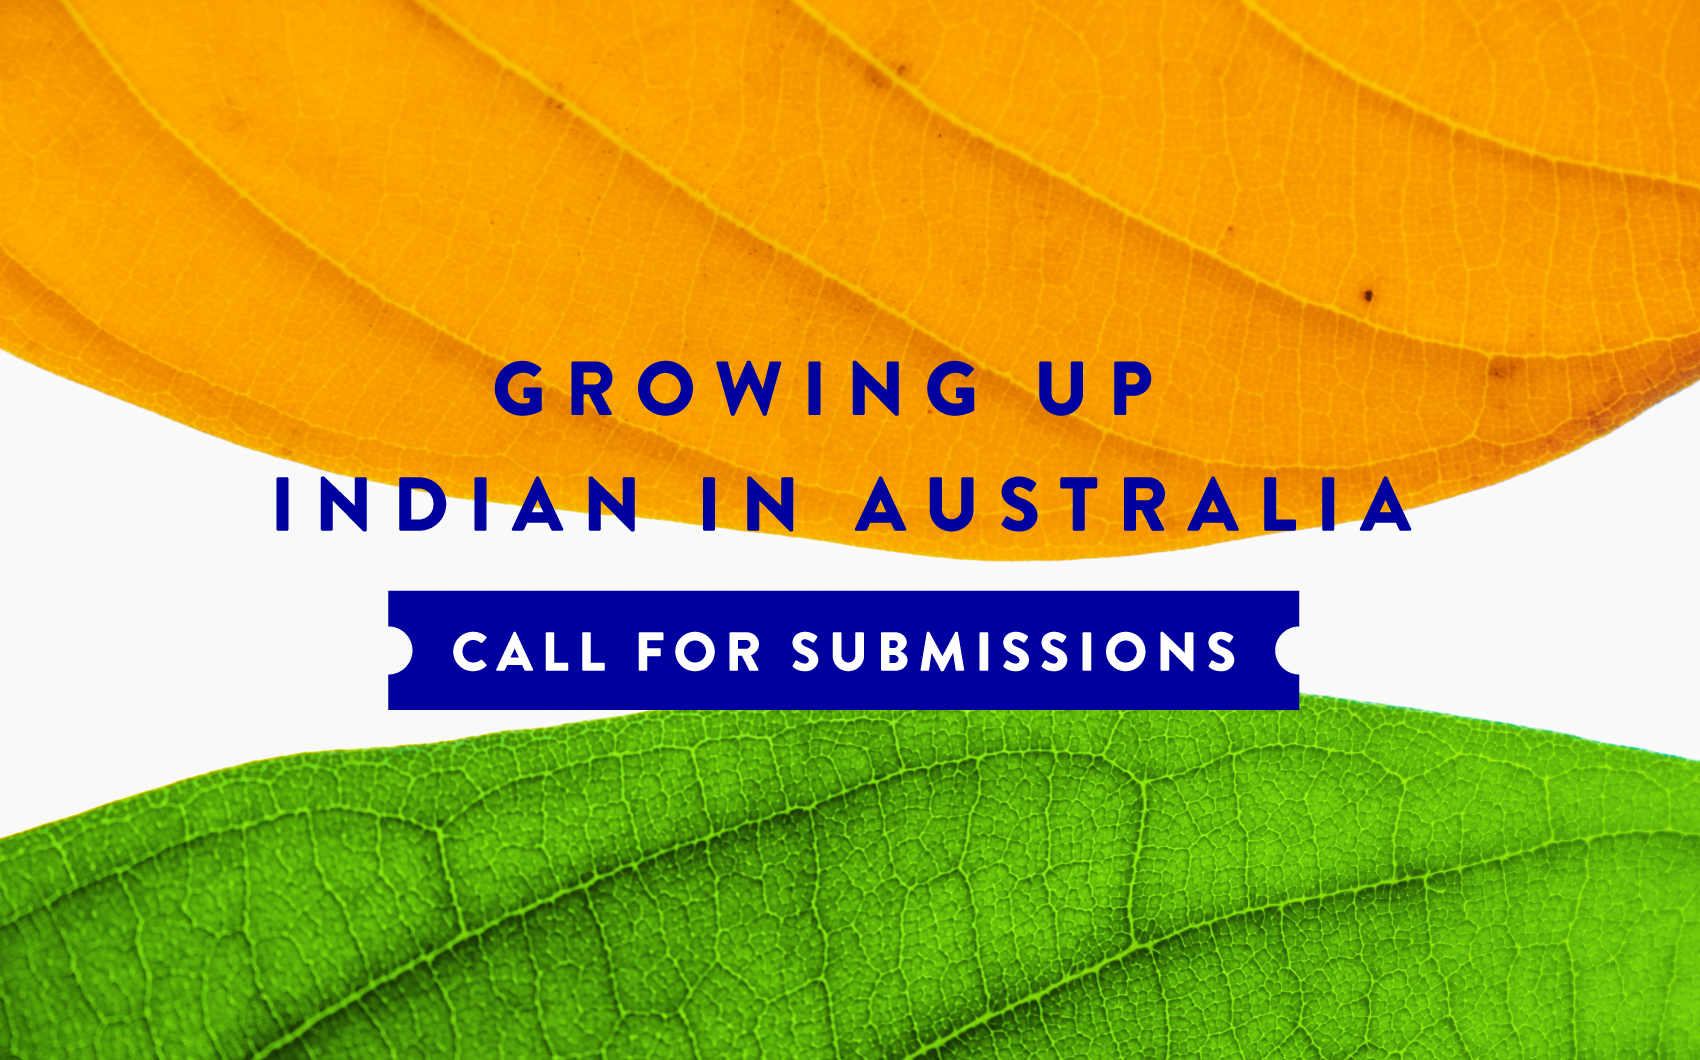 Growing Up Indian in Australia: Call for submissions